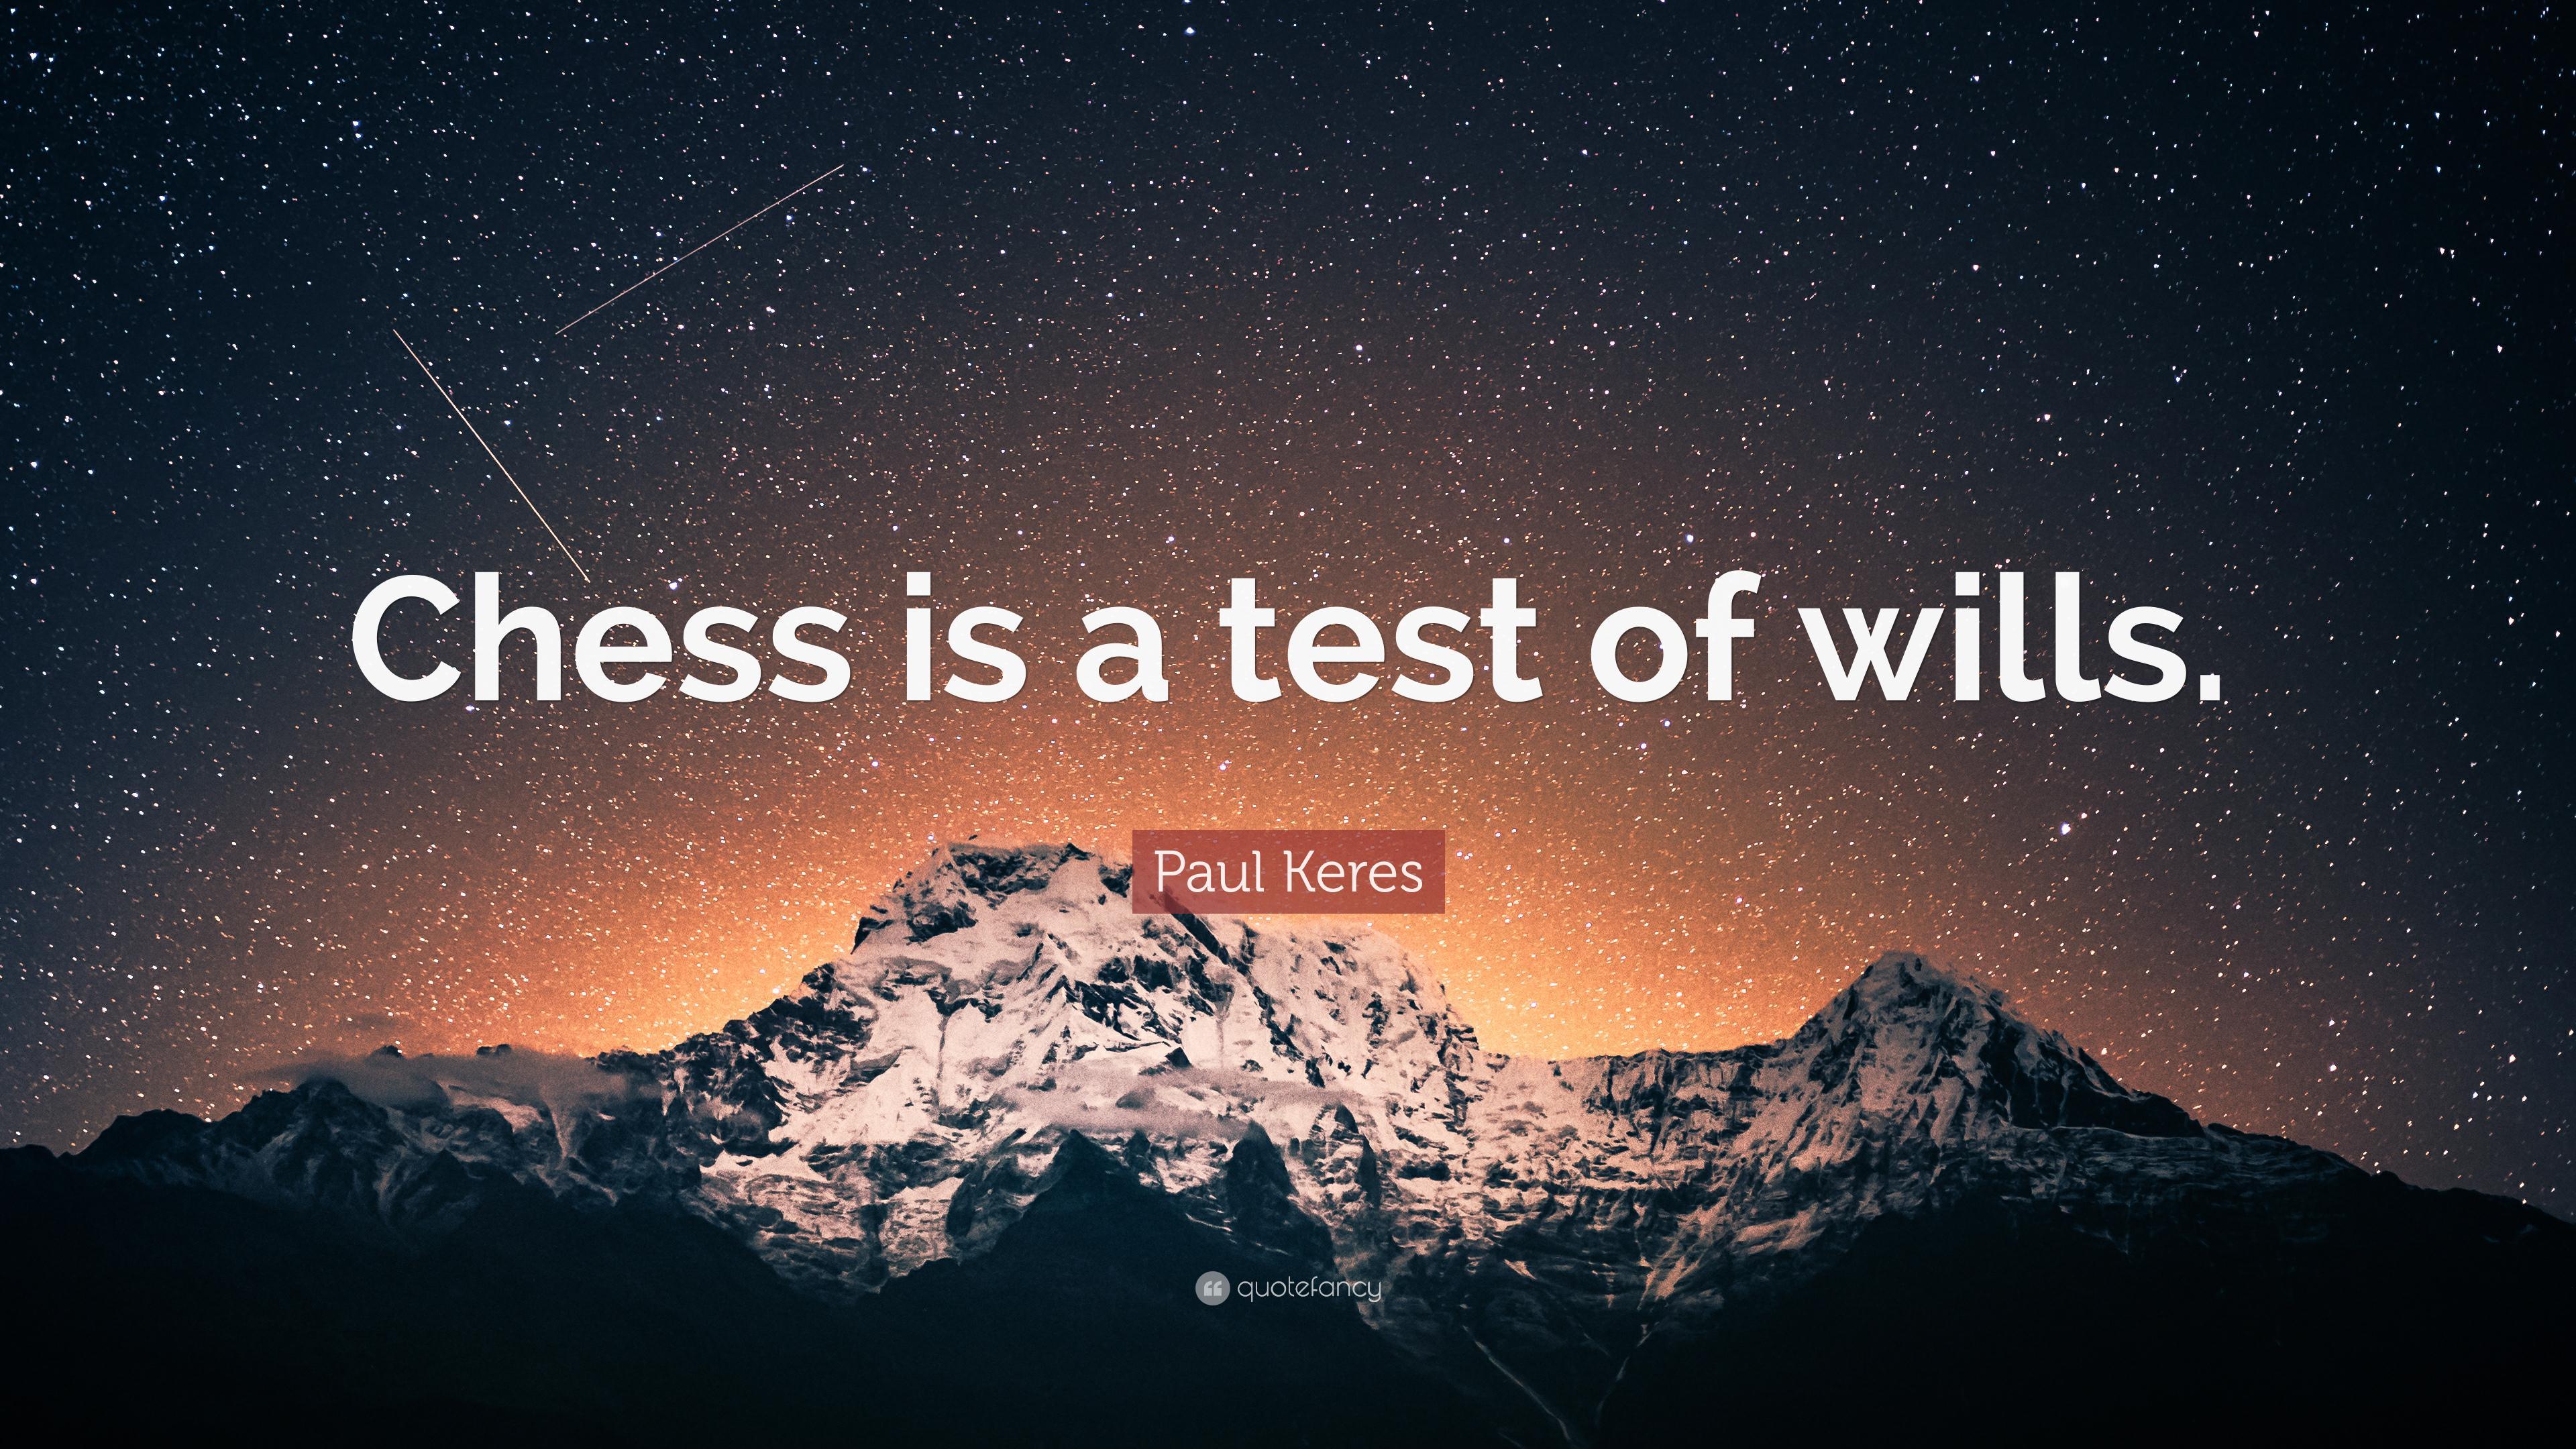 Paul Keres Quote: “Chess is a test of wills.” 10 wallpaper